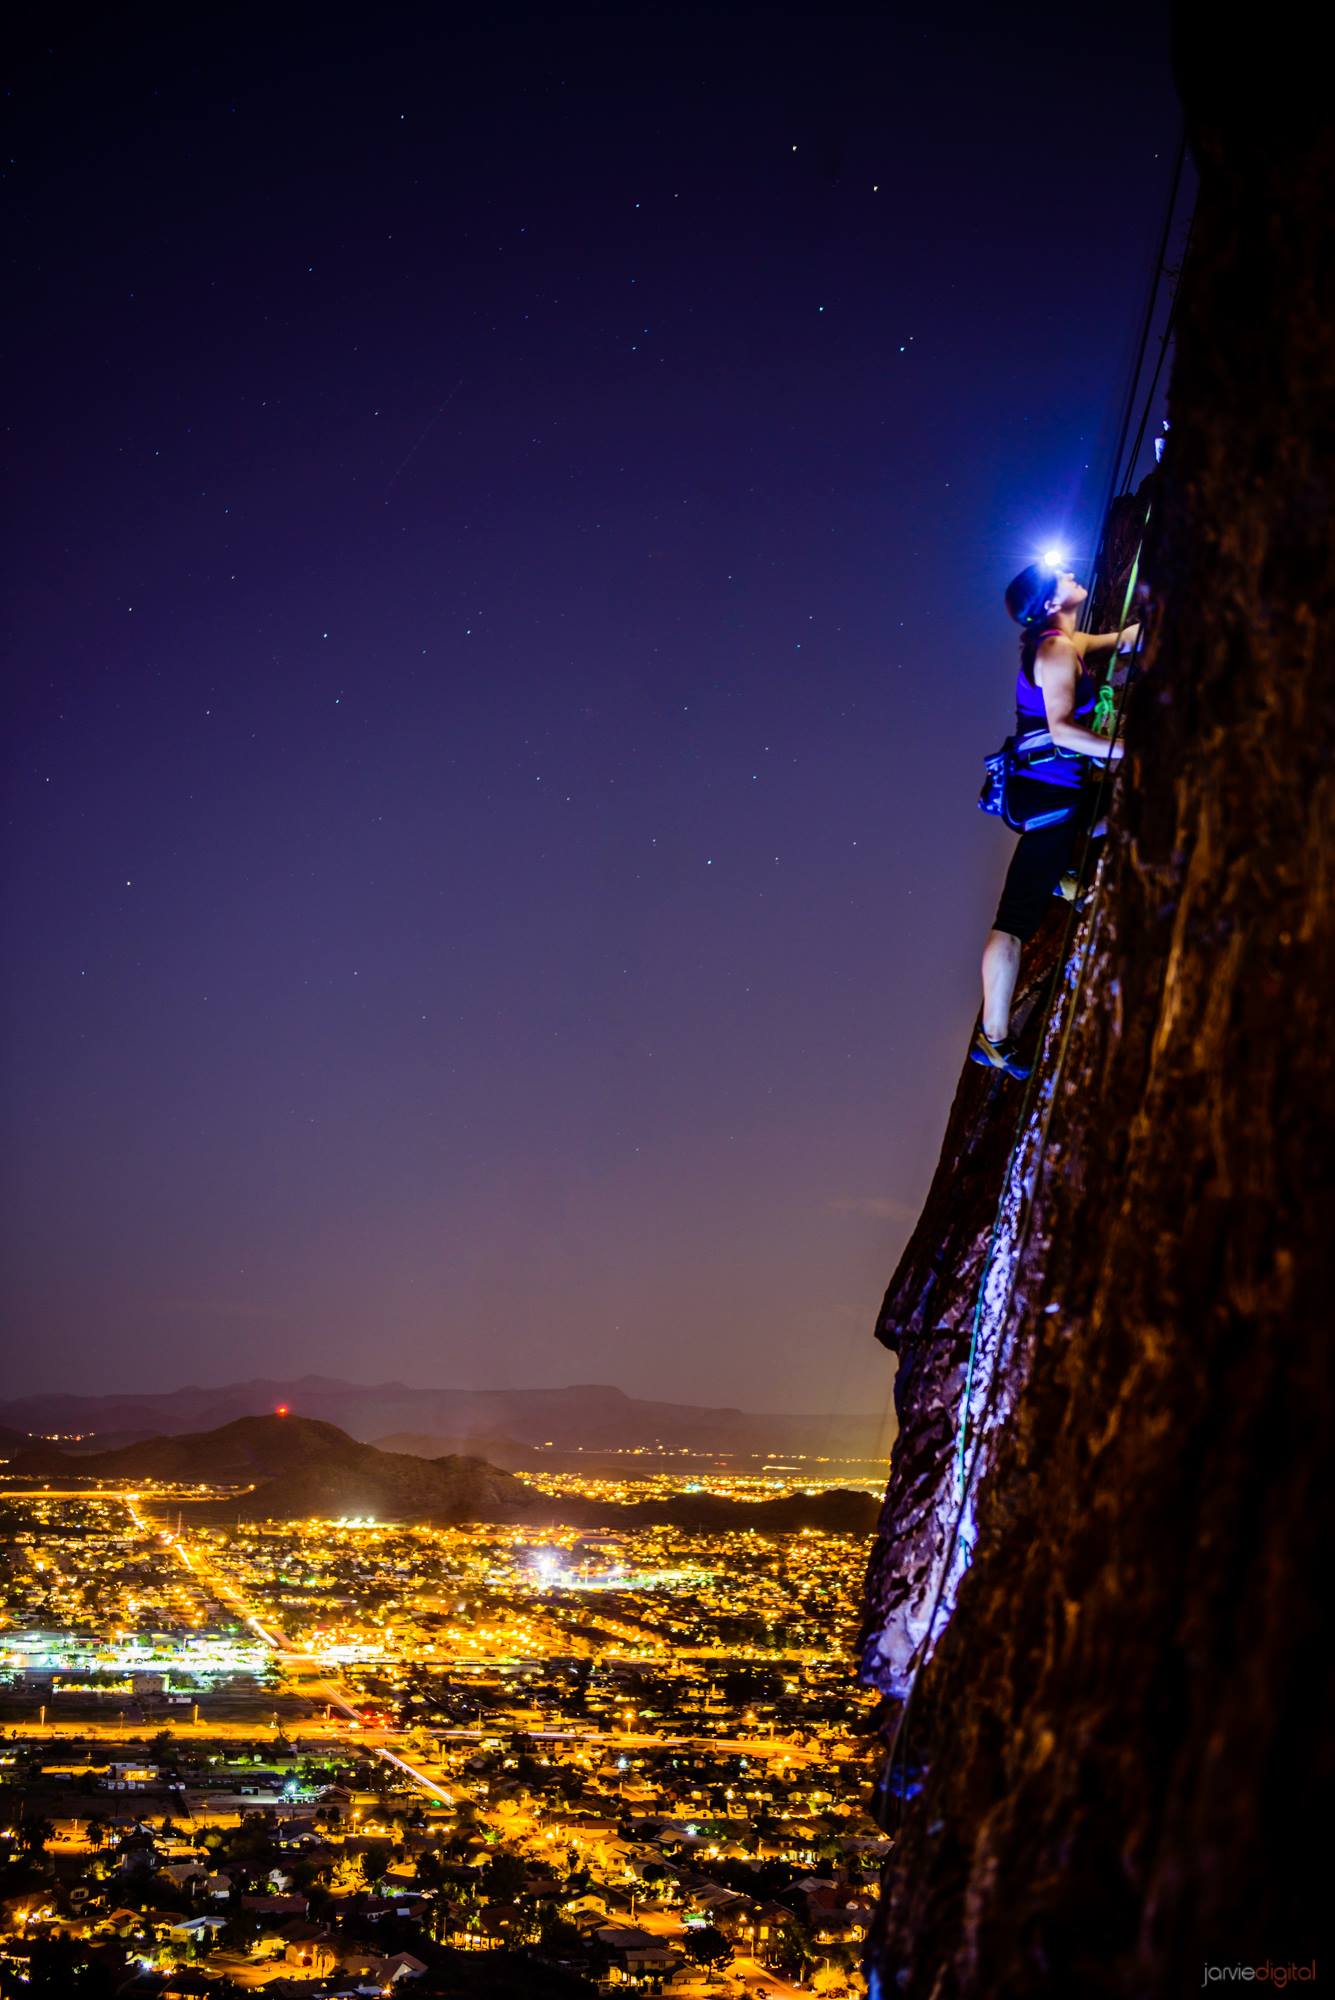 Spectacular Photo Of A Woman Climbing A Vertical Rock Wall At Night